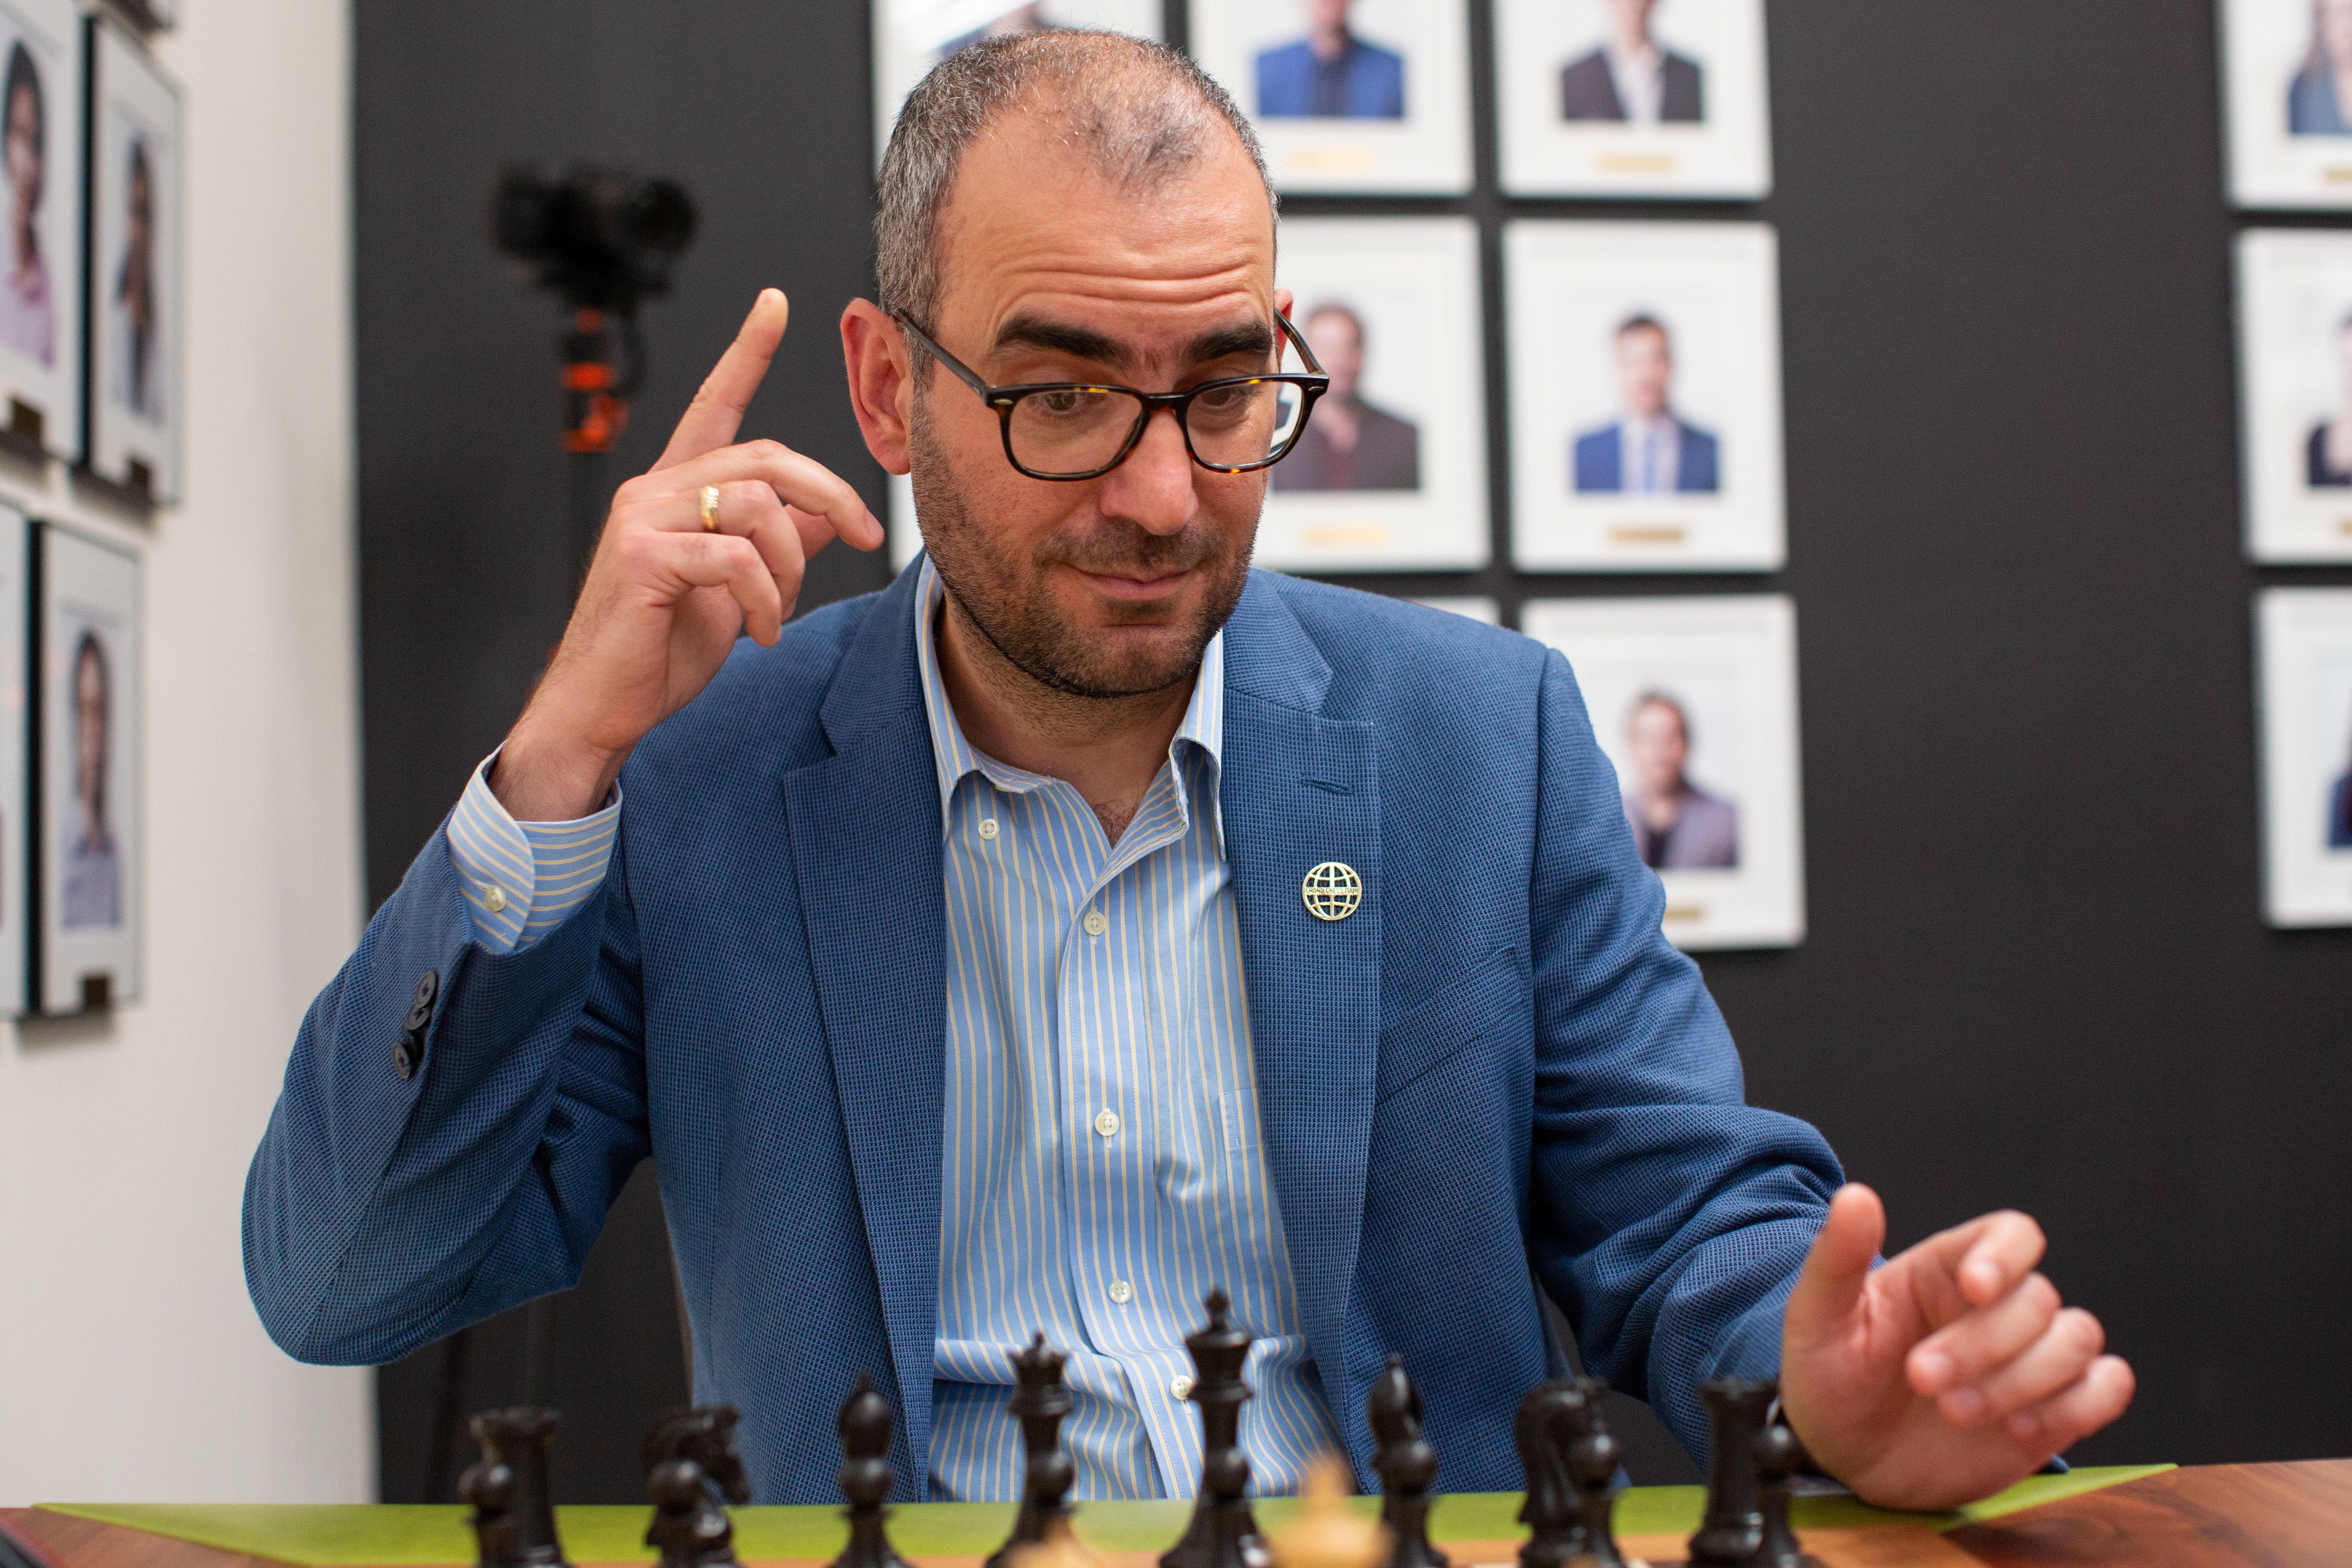 Alireza Firouzja on X: When I was in St. Louis earlier this year, playing  the Grand Chess Tour, I had a nice walk around the city, and look at what I  found!